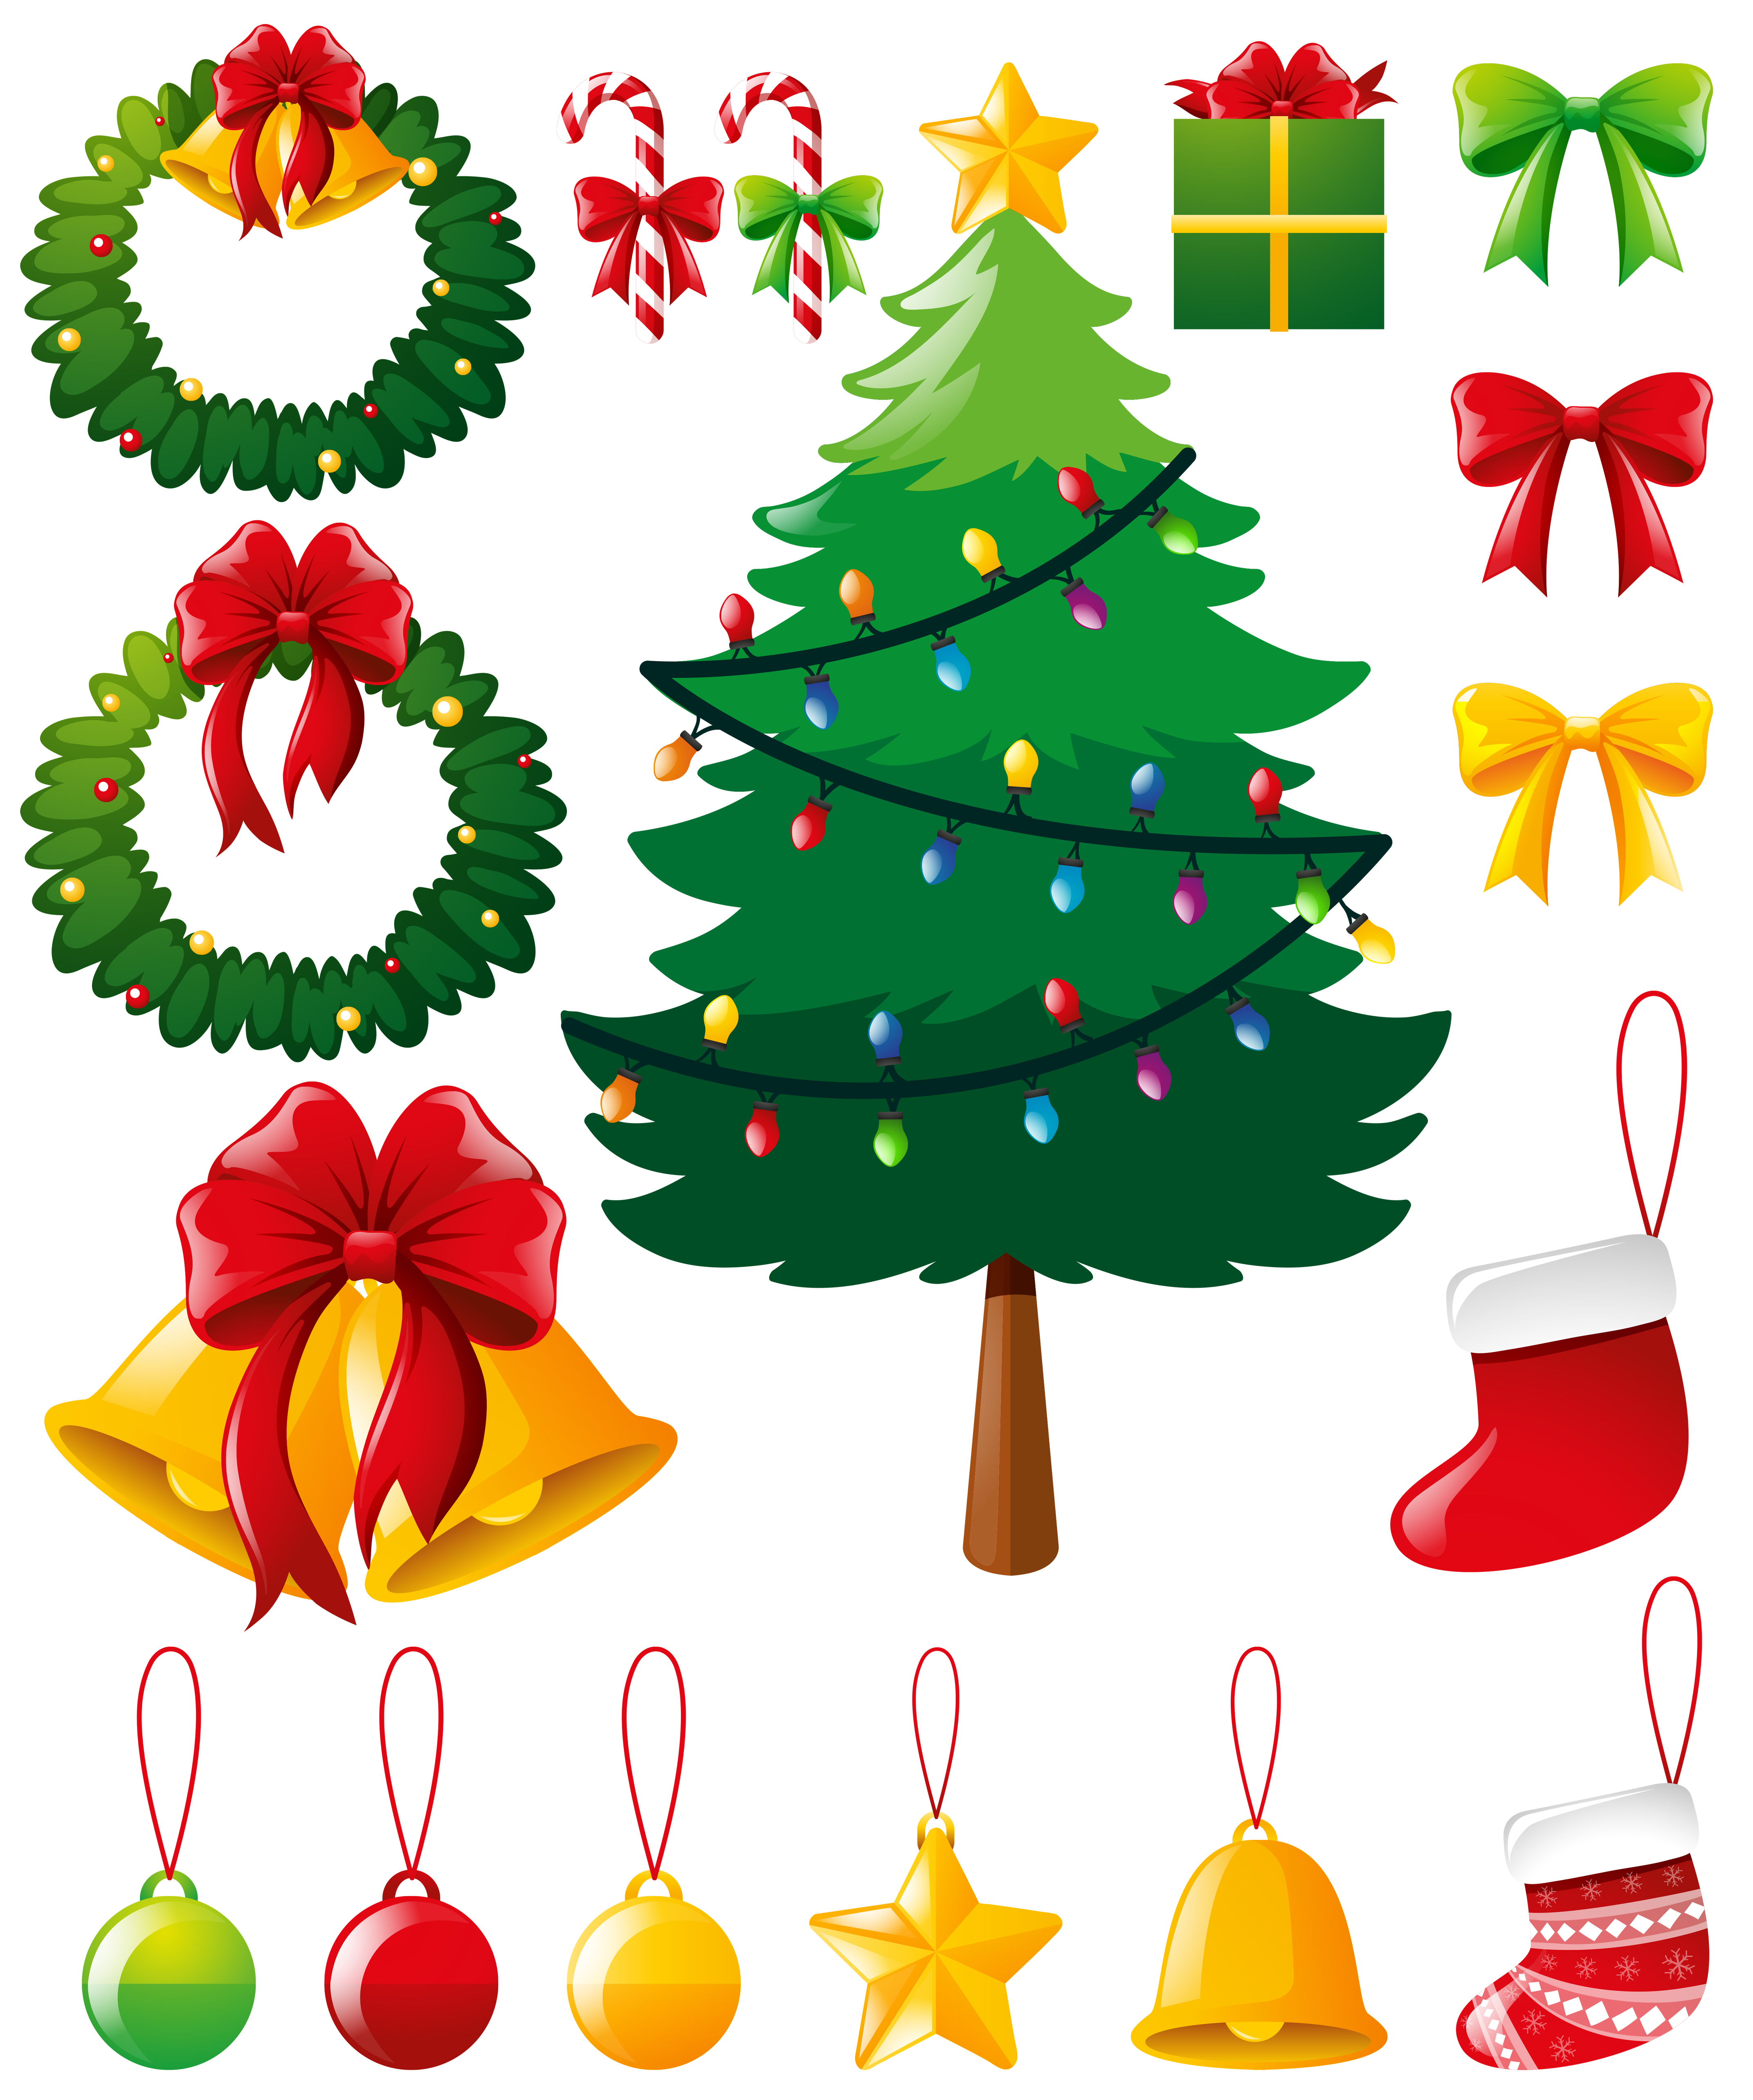 Christmas Tree And Other Ornaments Download Free Vectors Clipart Graphics Vector Art